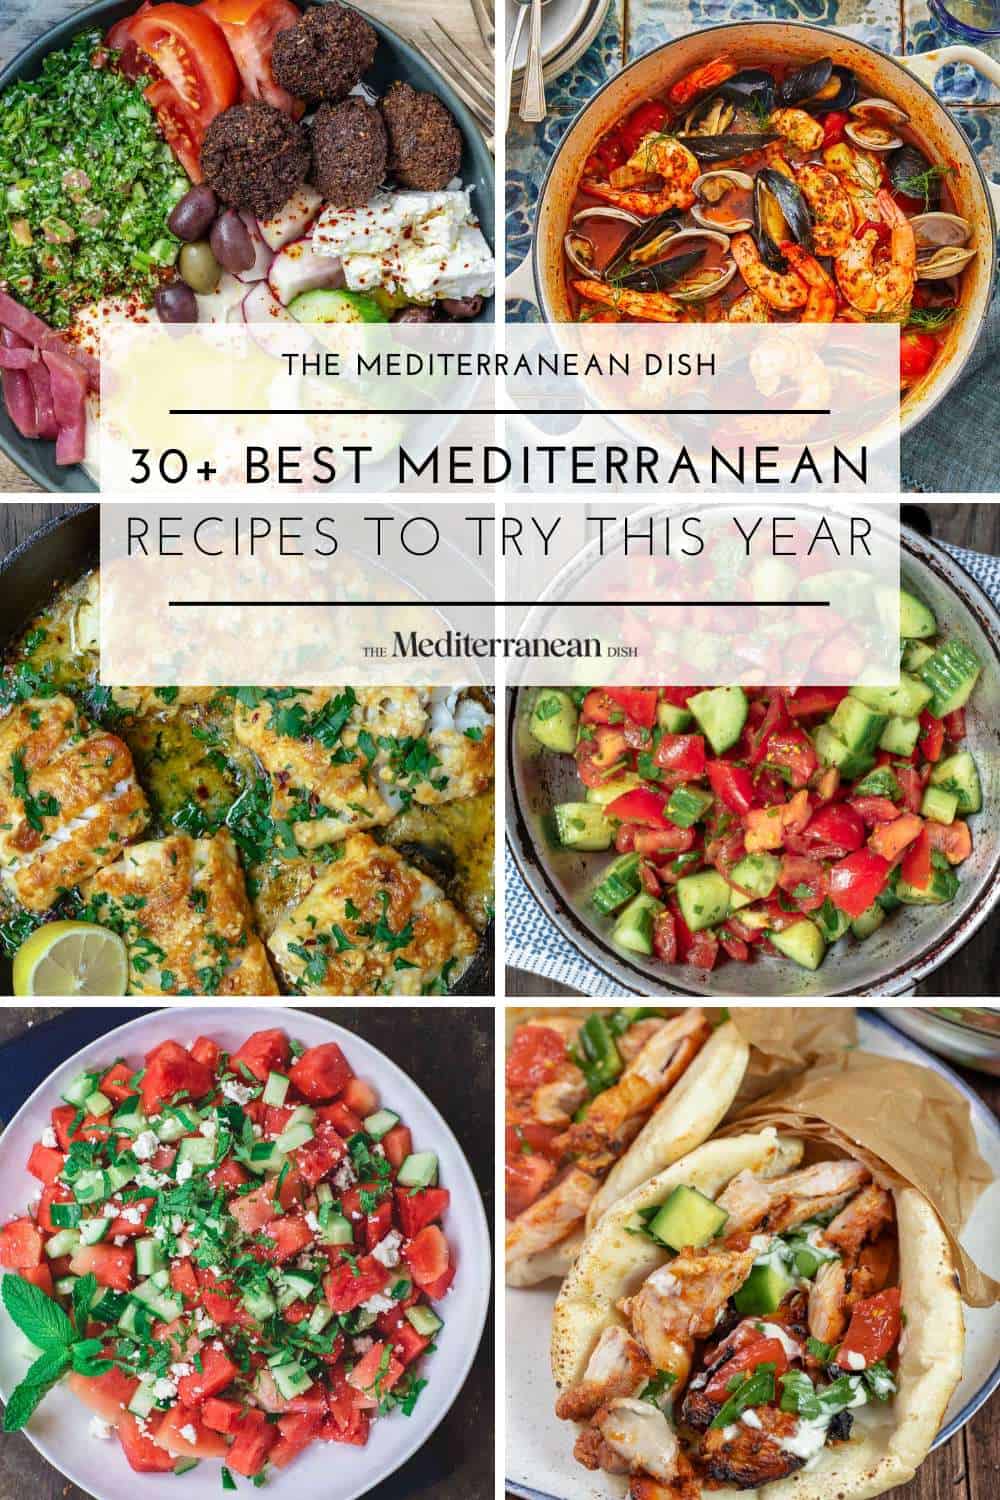 Mediterranean Diet and Healthy Vegetable Dishes